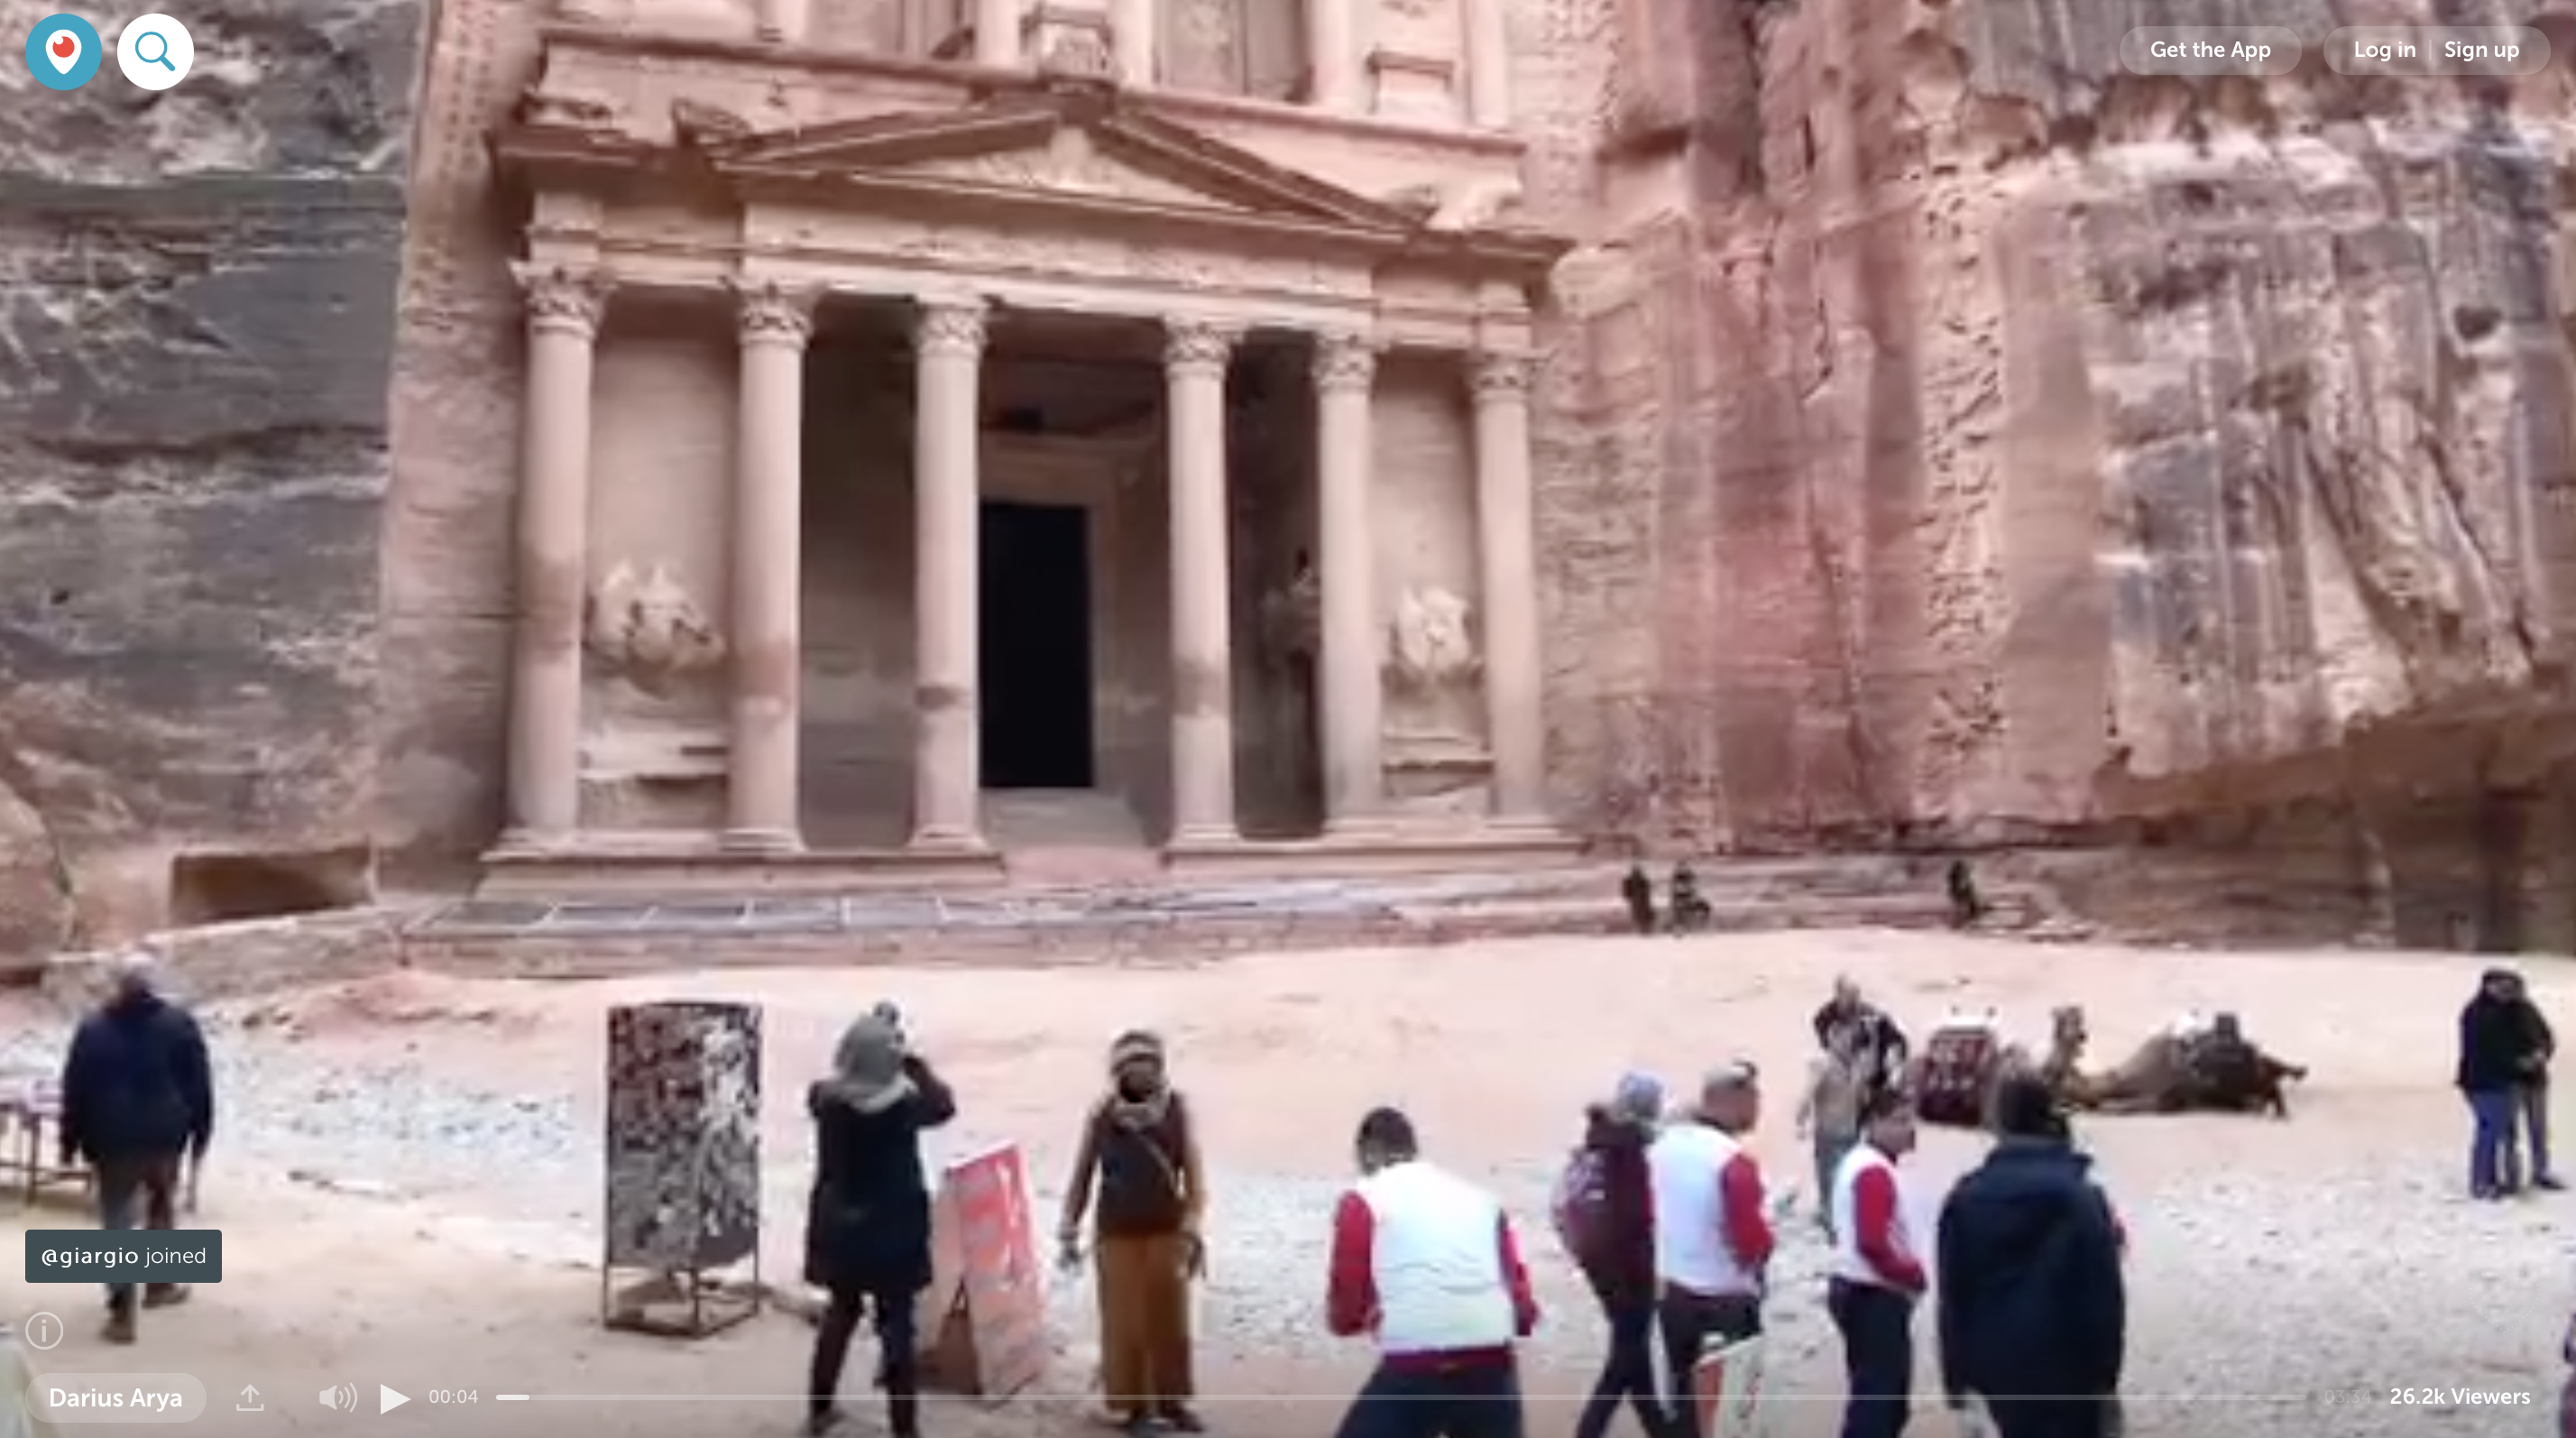 Russia celebrates Defense of the Fatherland Day / History and beauty of Petra, Jordan